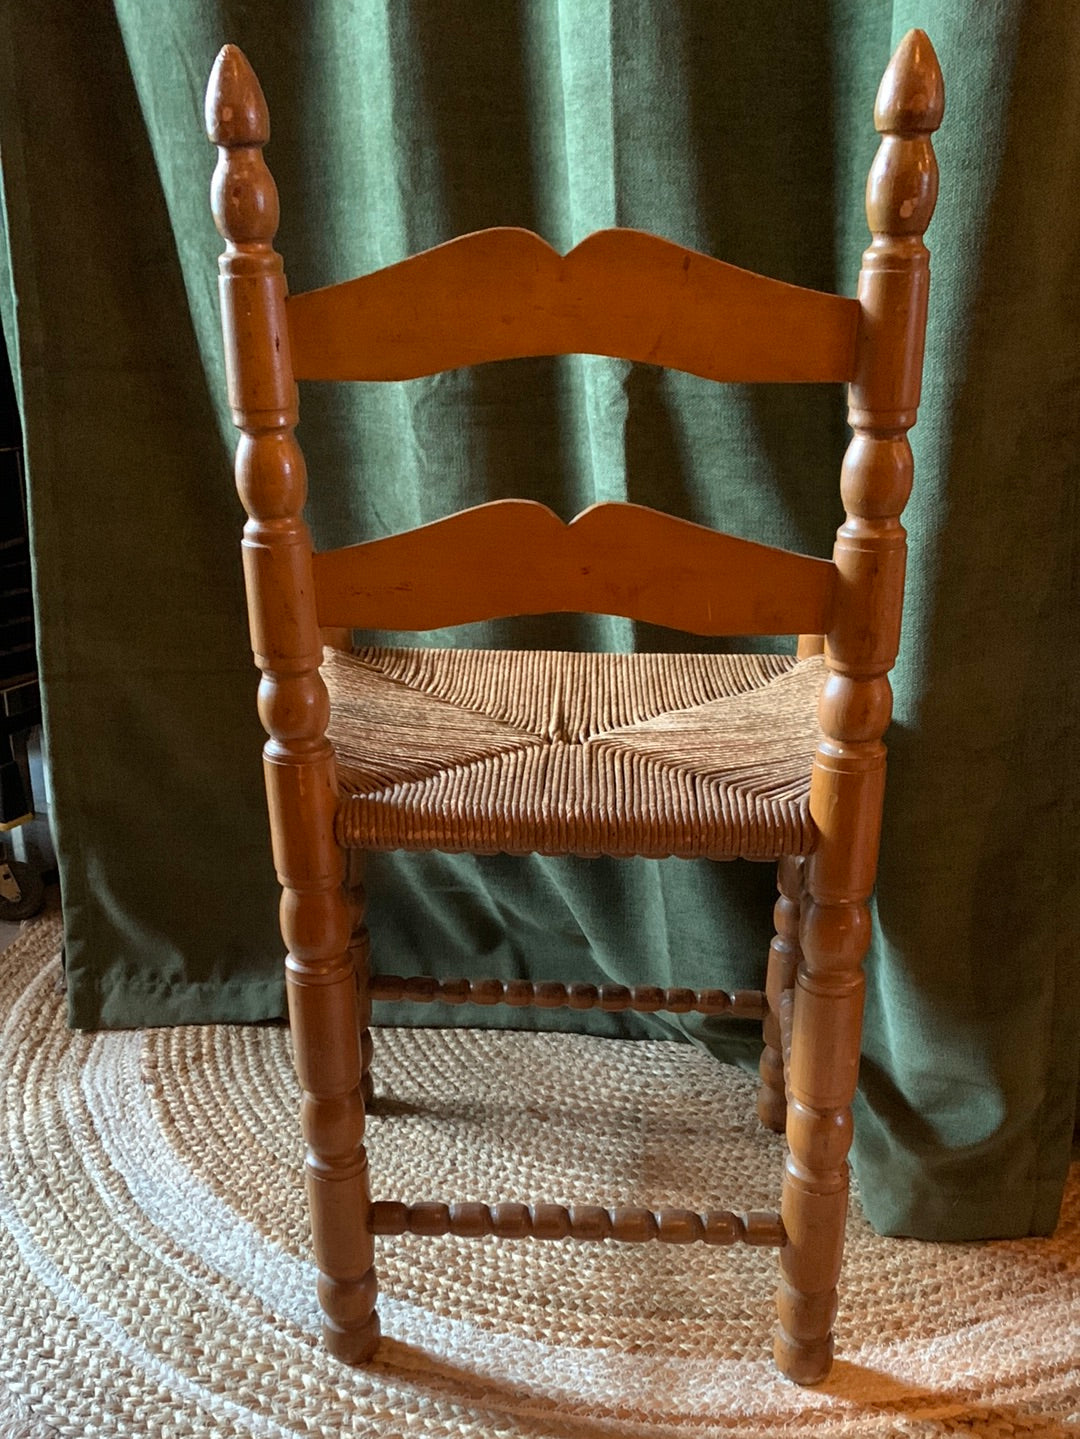 Vintage carved wood chair with wicker seat